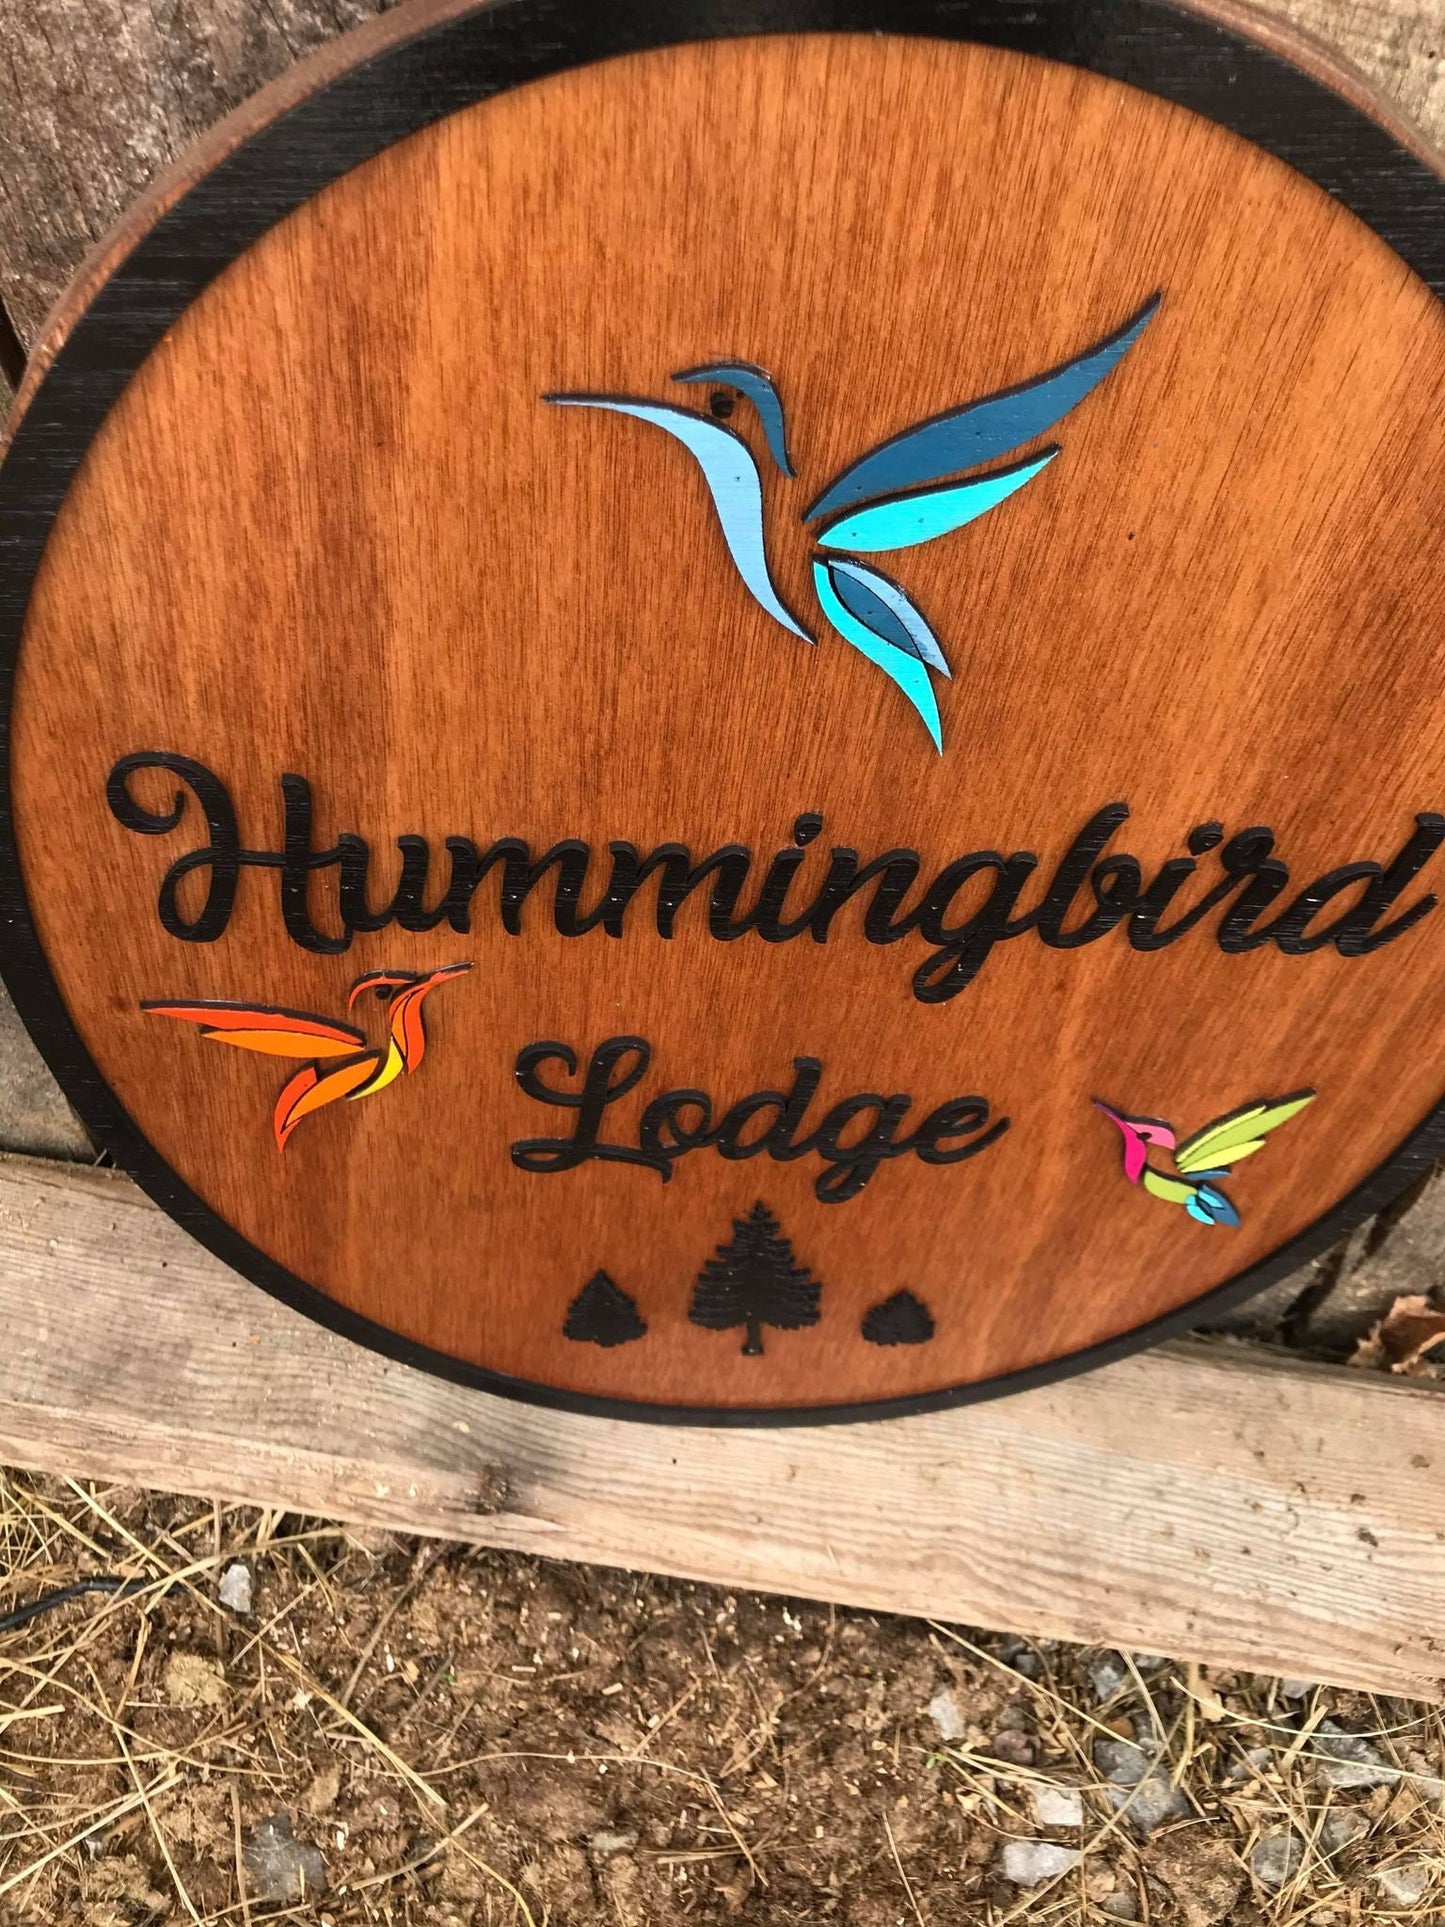 Custom Lodge Sign Hummingbird 3D Raised Bird Large Wood Cabin BNB Rental Colorful Rustic Business Sign Text Oval Indoor Outdoor